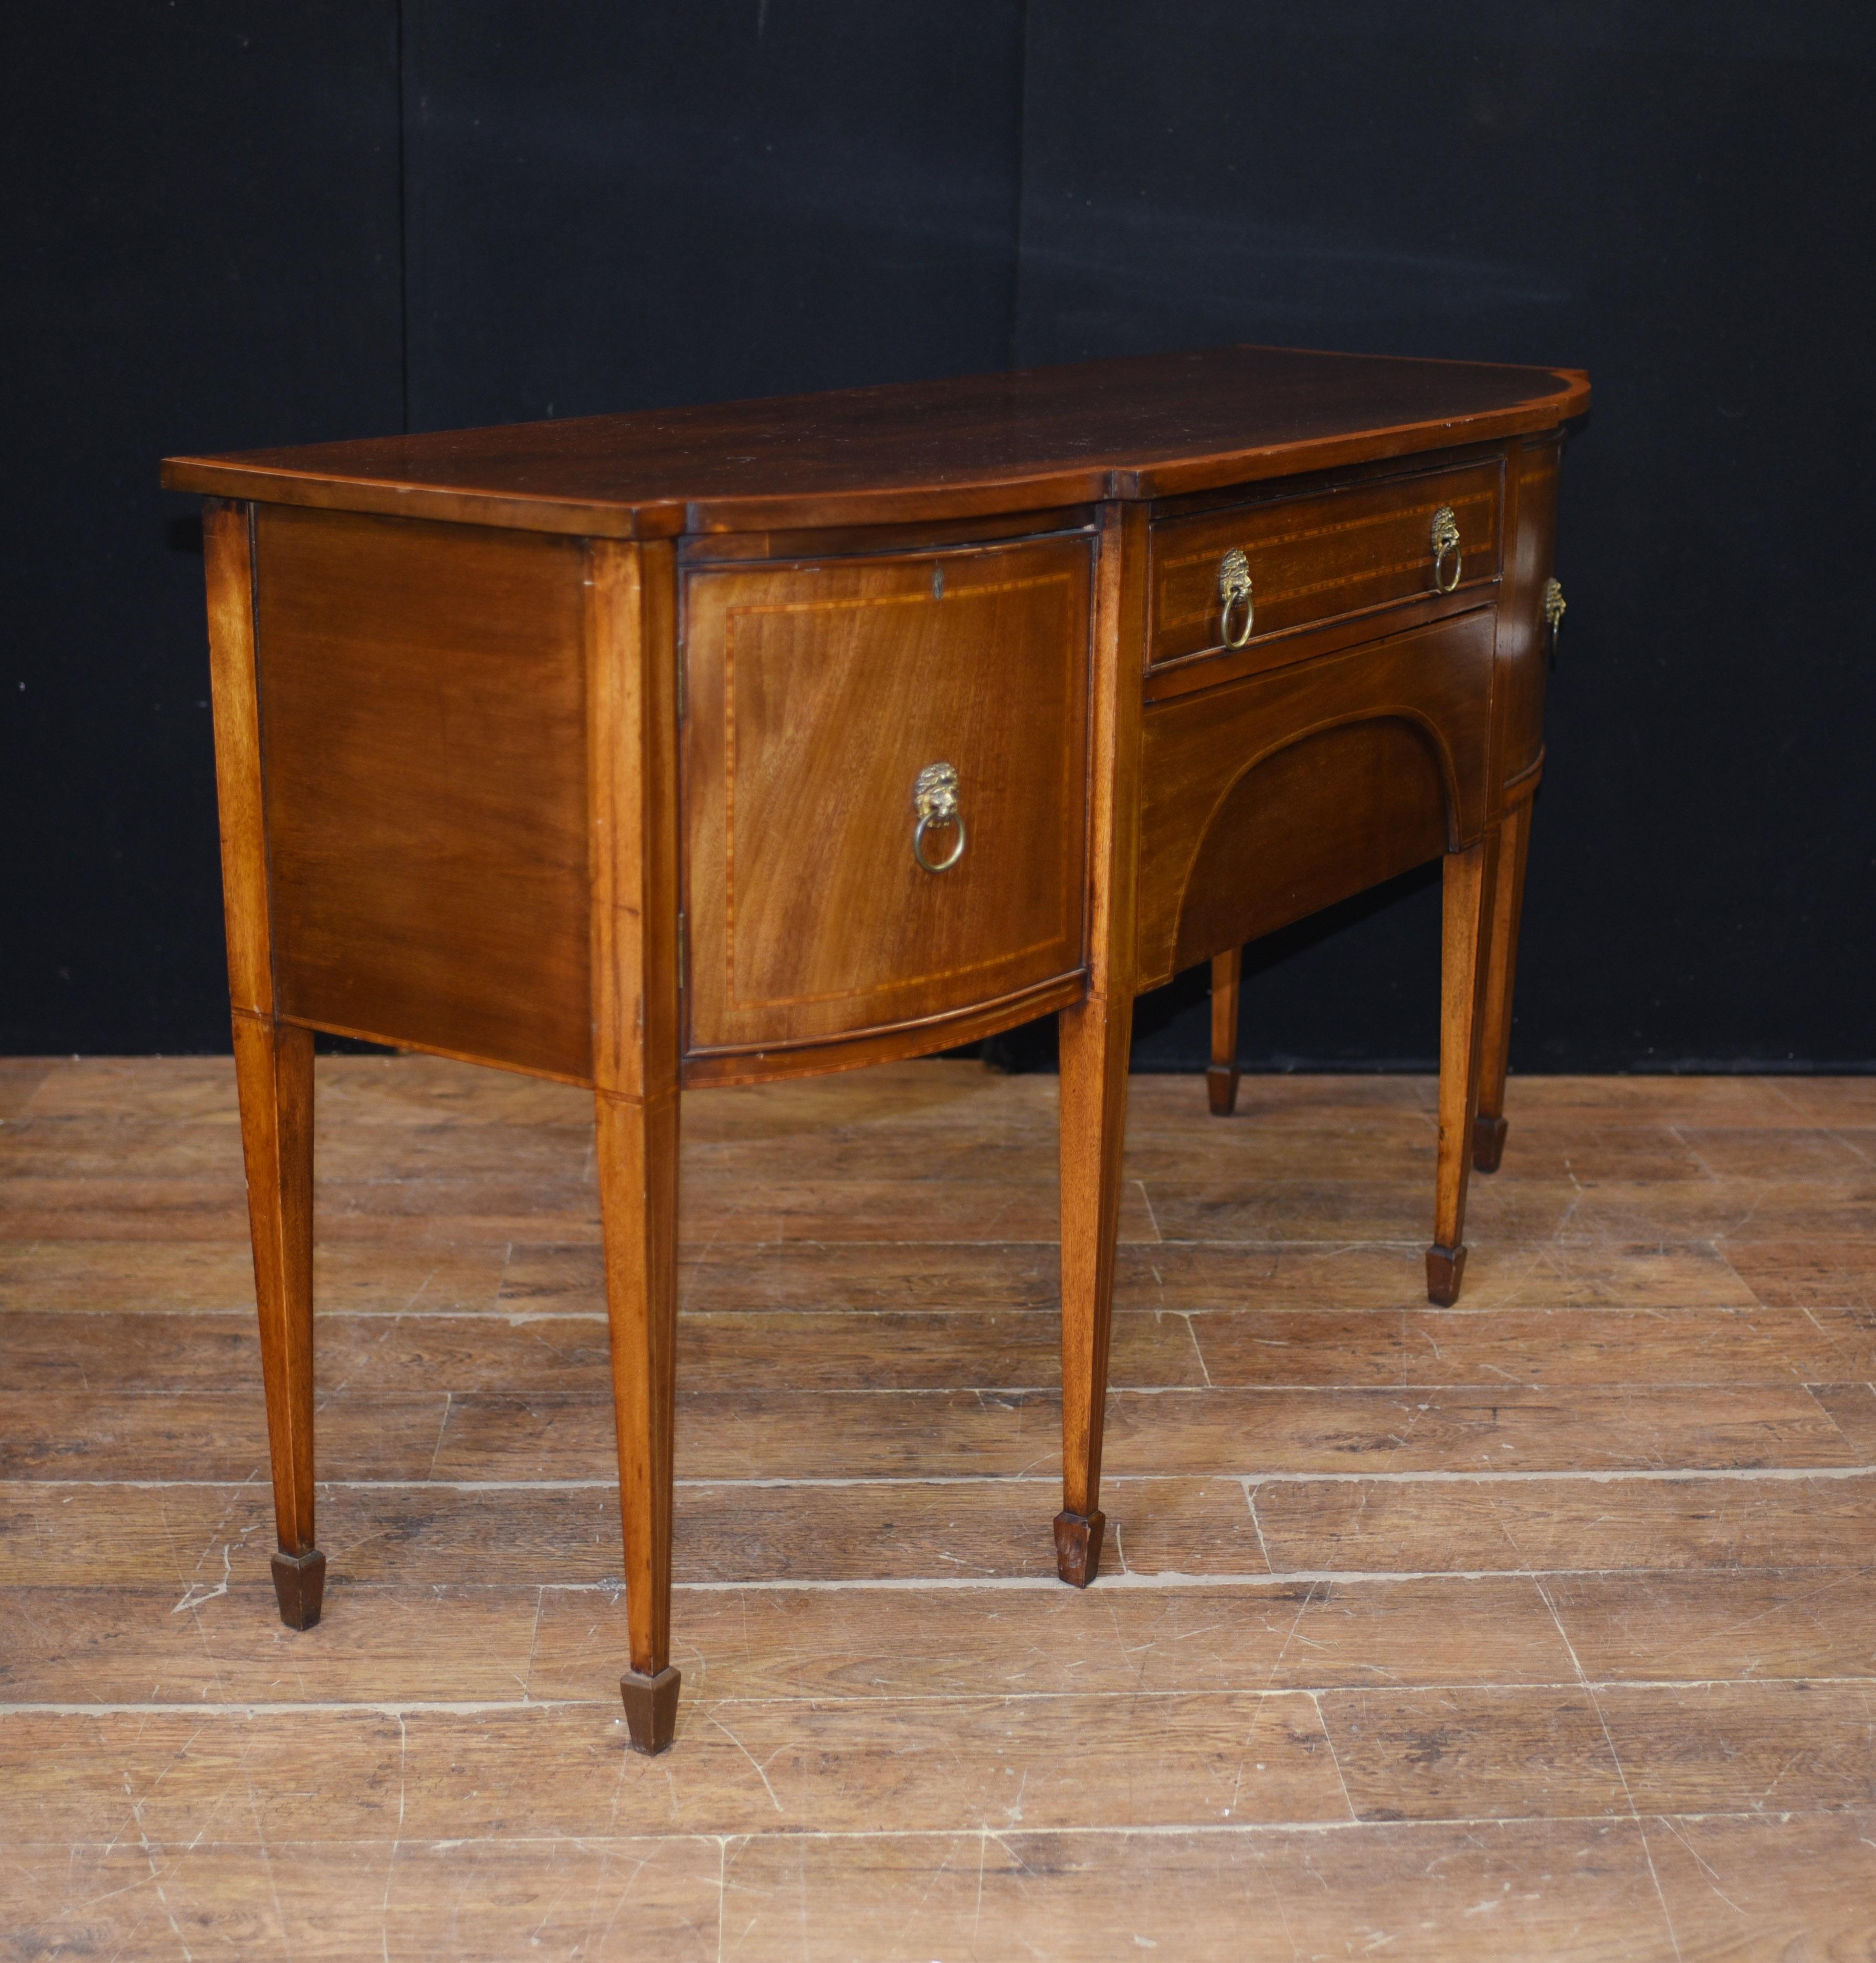 - Gorgeous Sheraton Revival sideboard in mahogany and satinwood crossbanded 
- Clean and minimal design perfect for modern interiors
- We date this elegant server to circa 1910
- Viewings available by appointment
- Offered in great shape ready